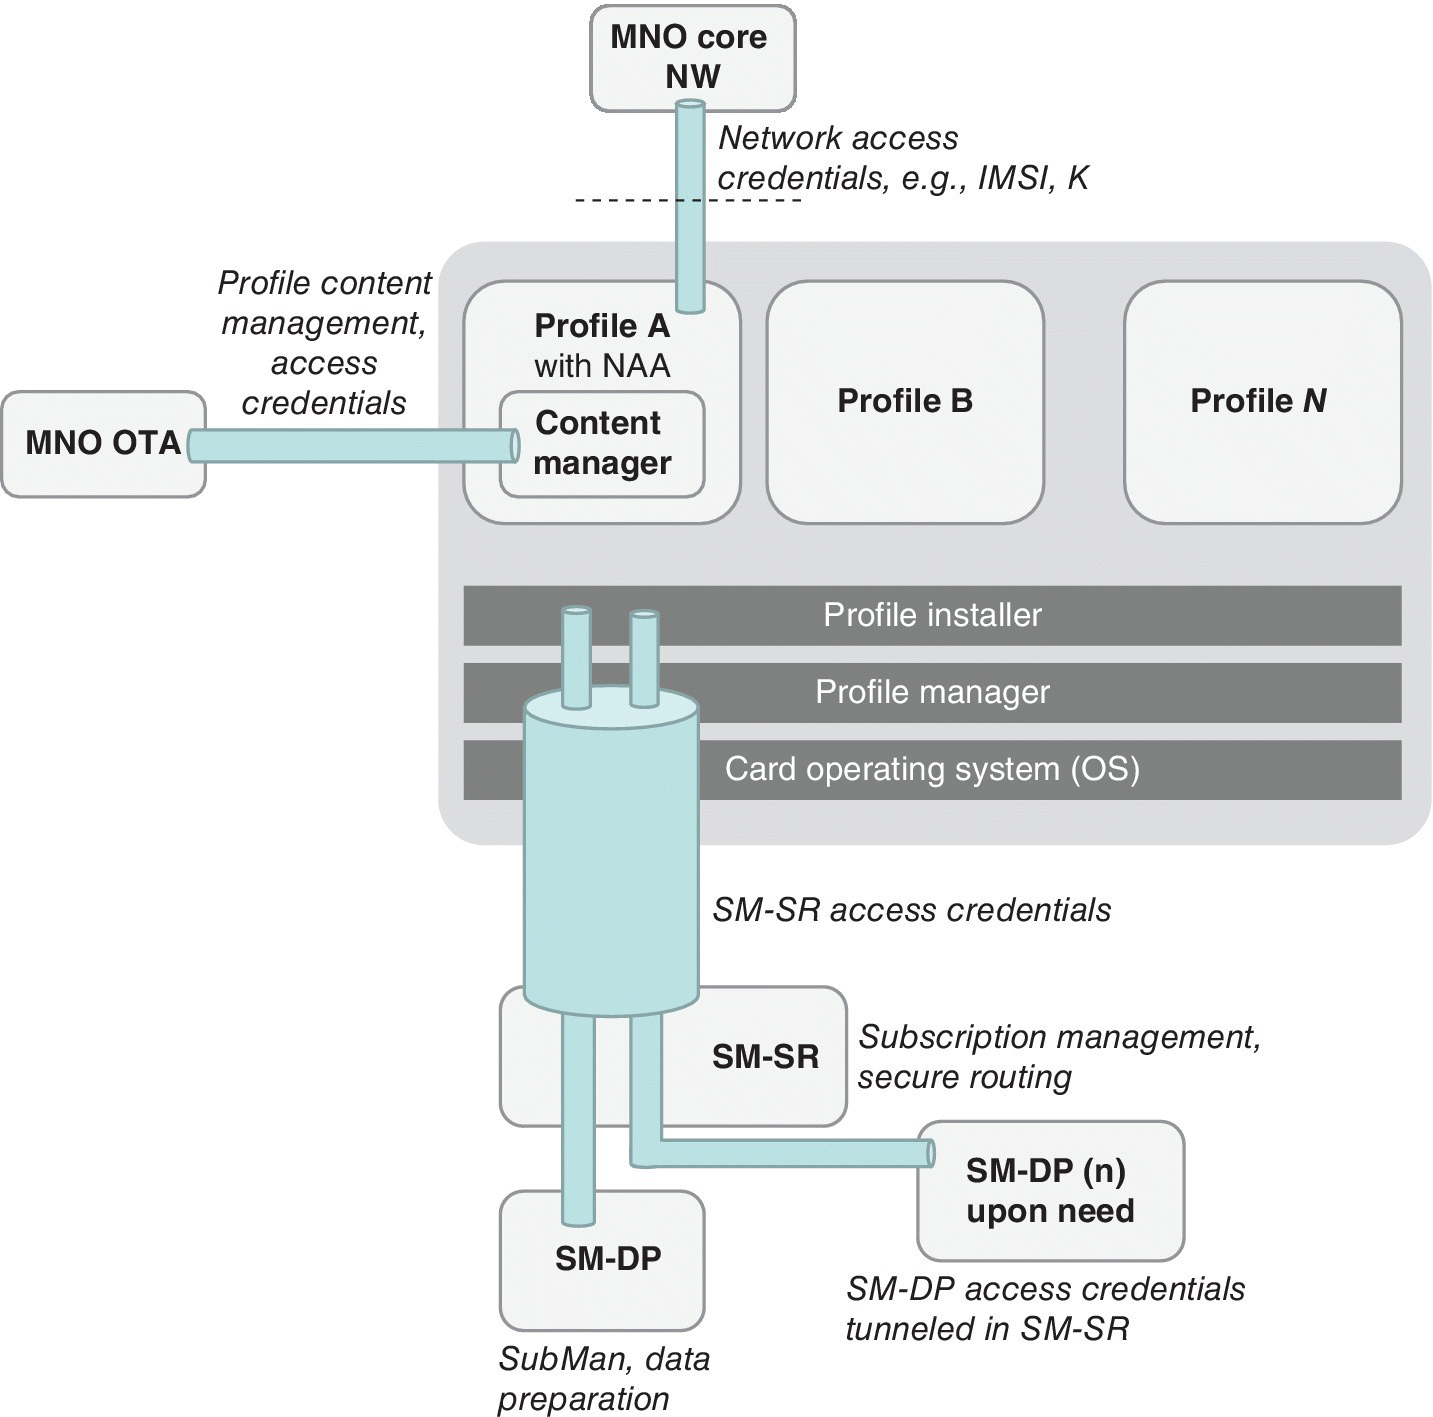 Schematic diagram depicting the logical aspects of the eUICC architecture with MNO OTA, MNO core NW, profile A with NAA, profile B, profile N, SM-SR, SM-DP, and SM-DP (n) upon need highlighted.